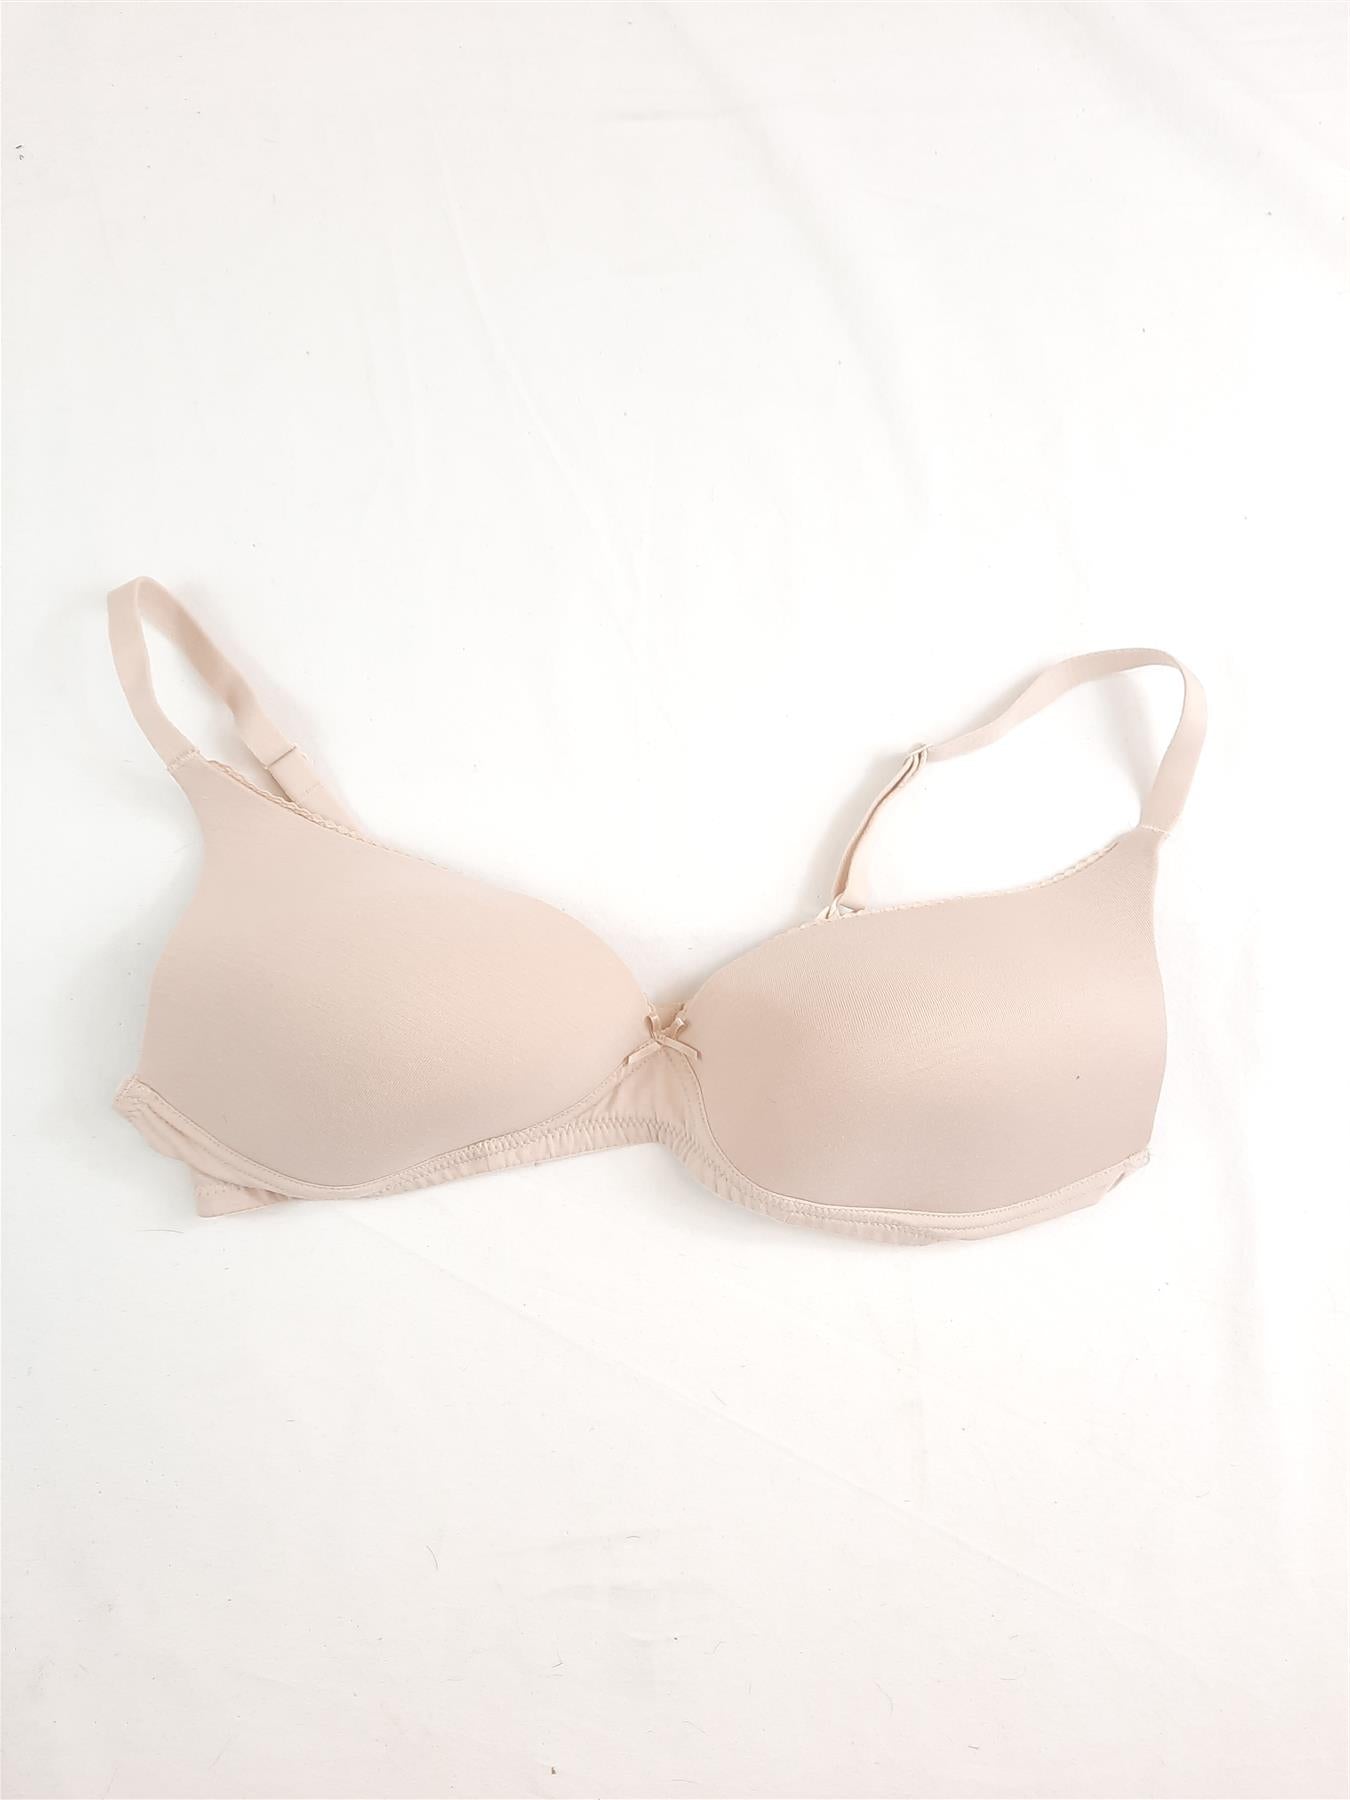 M S Cotton-Rich Lounge Bra Non-Wired Lightly-Padded Soft Comfort Brand New